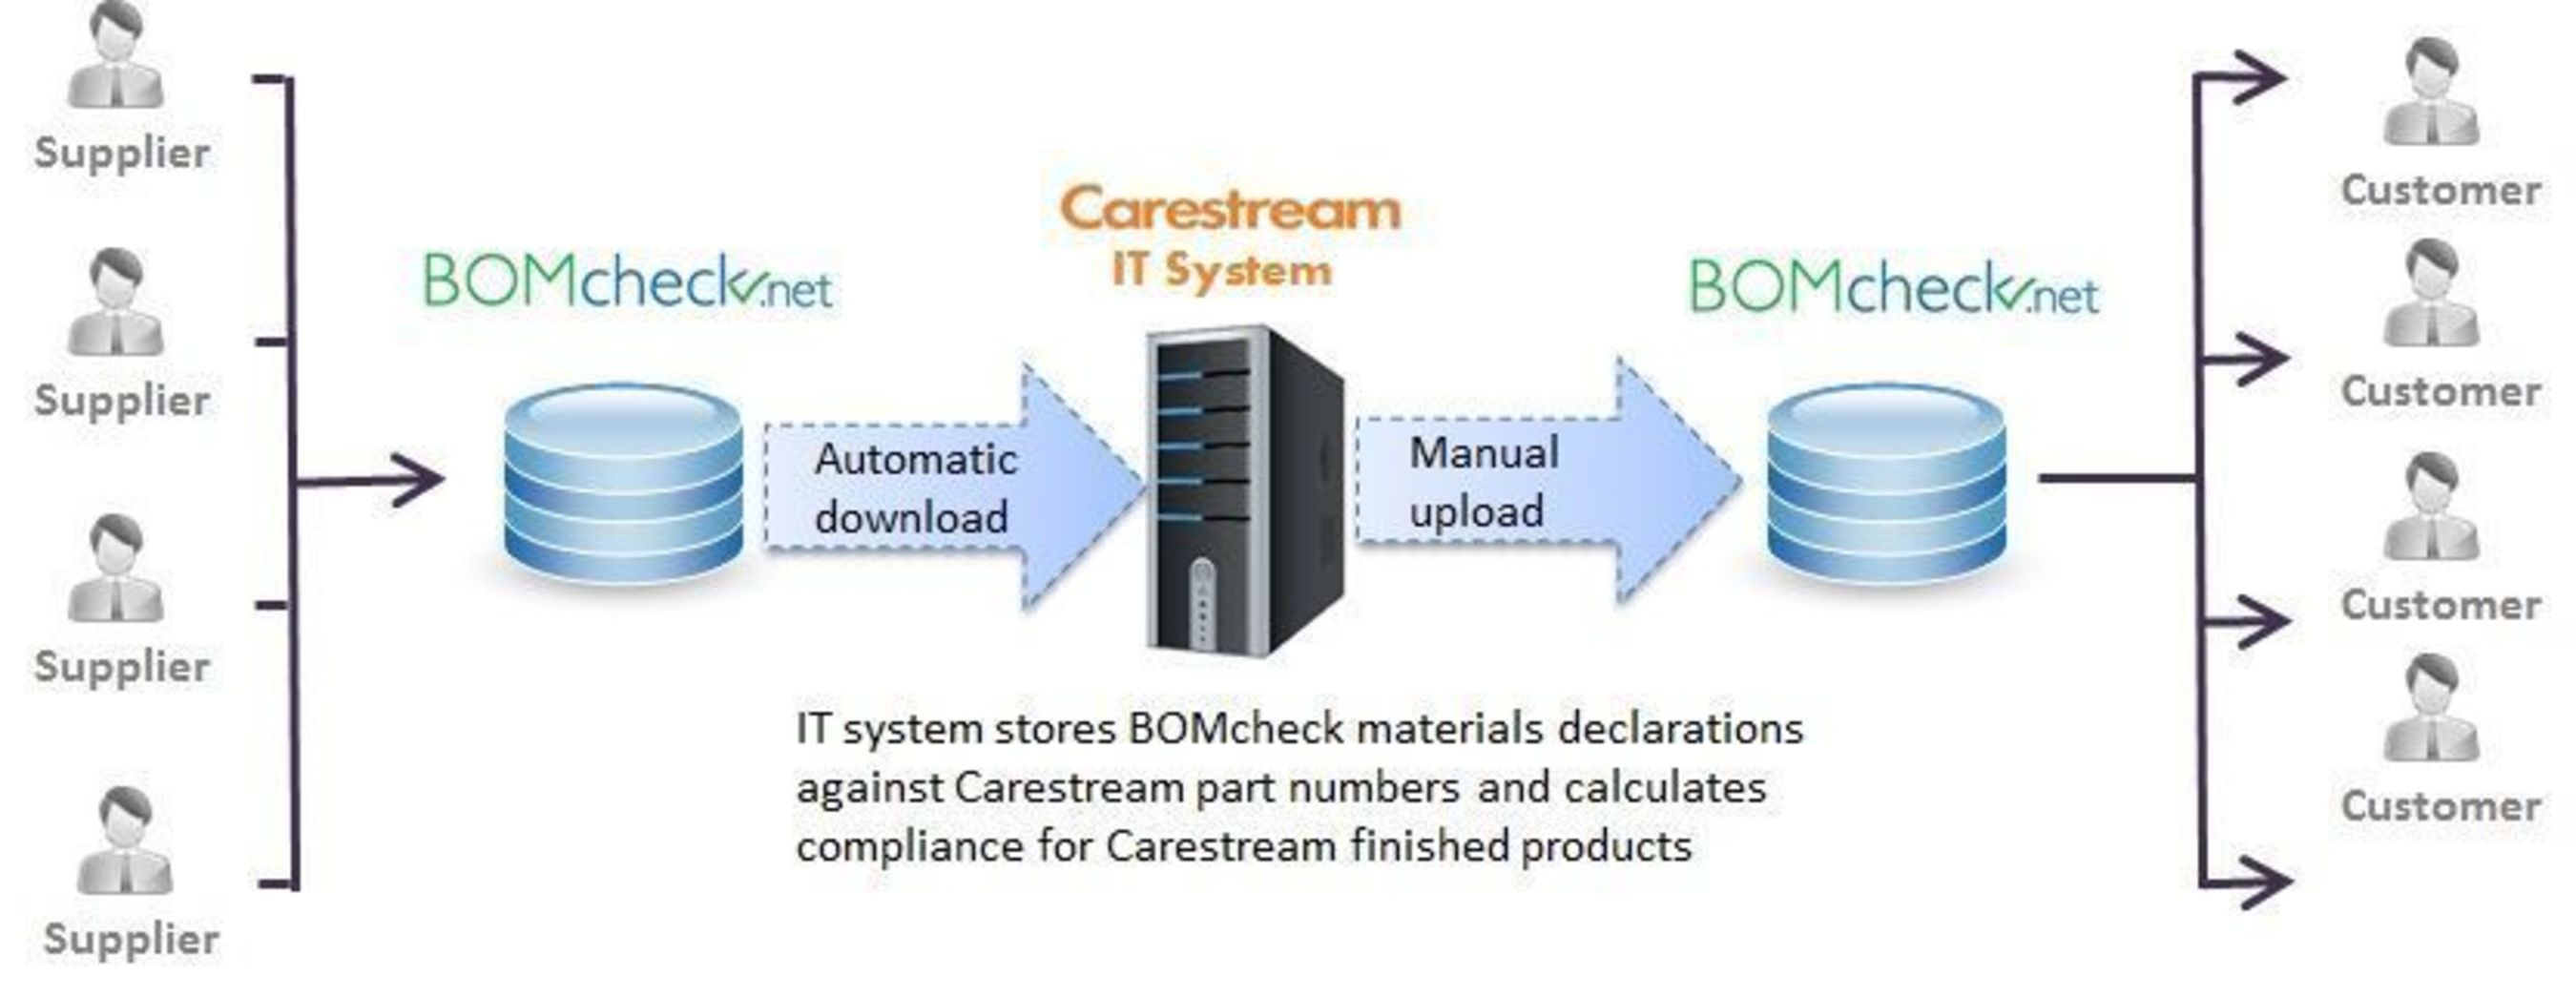 Automatic download of BOMcheck IPC 1752A materials declarations to Carestream IT system using the API web interface. (PRNewsFoto/ENVIRON)